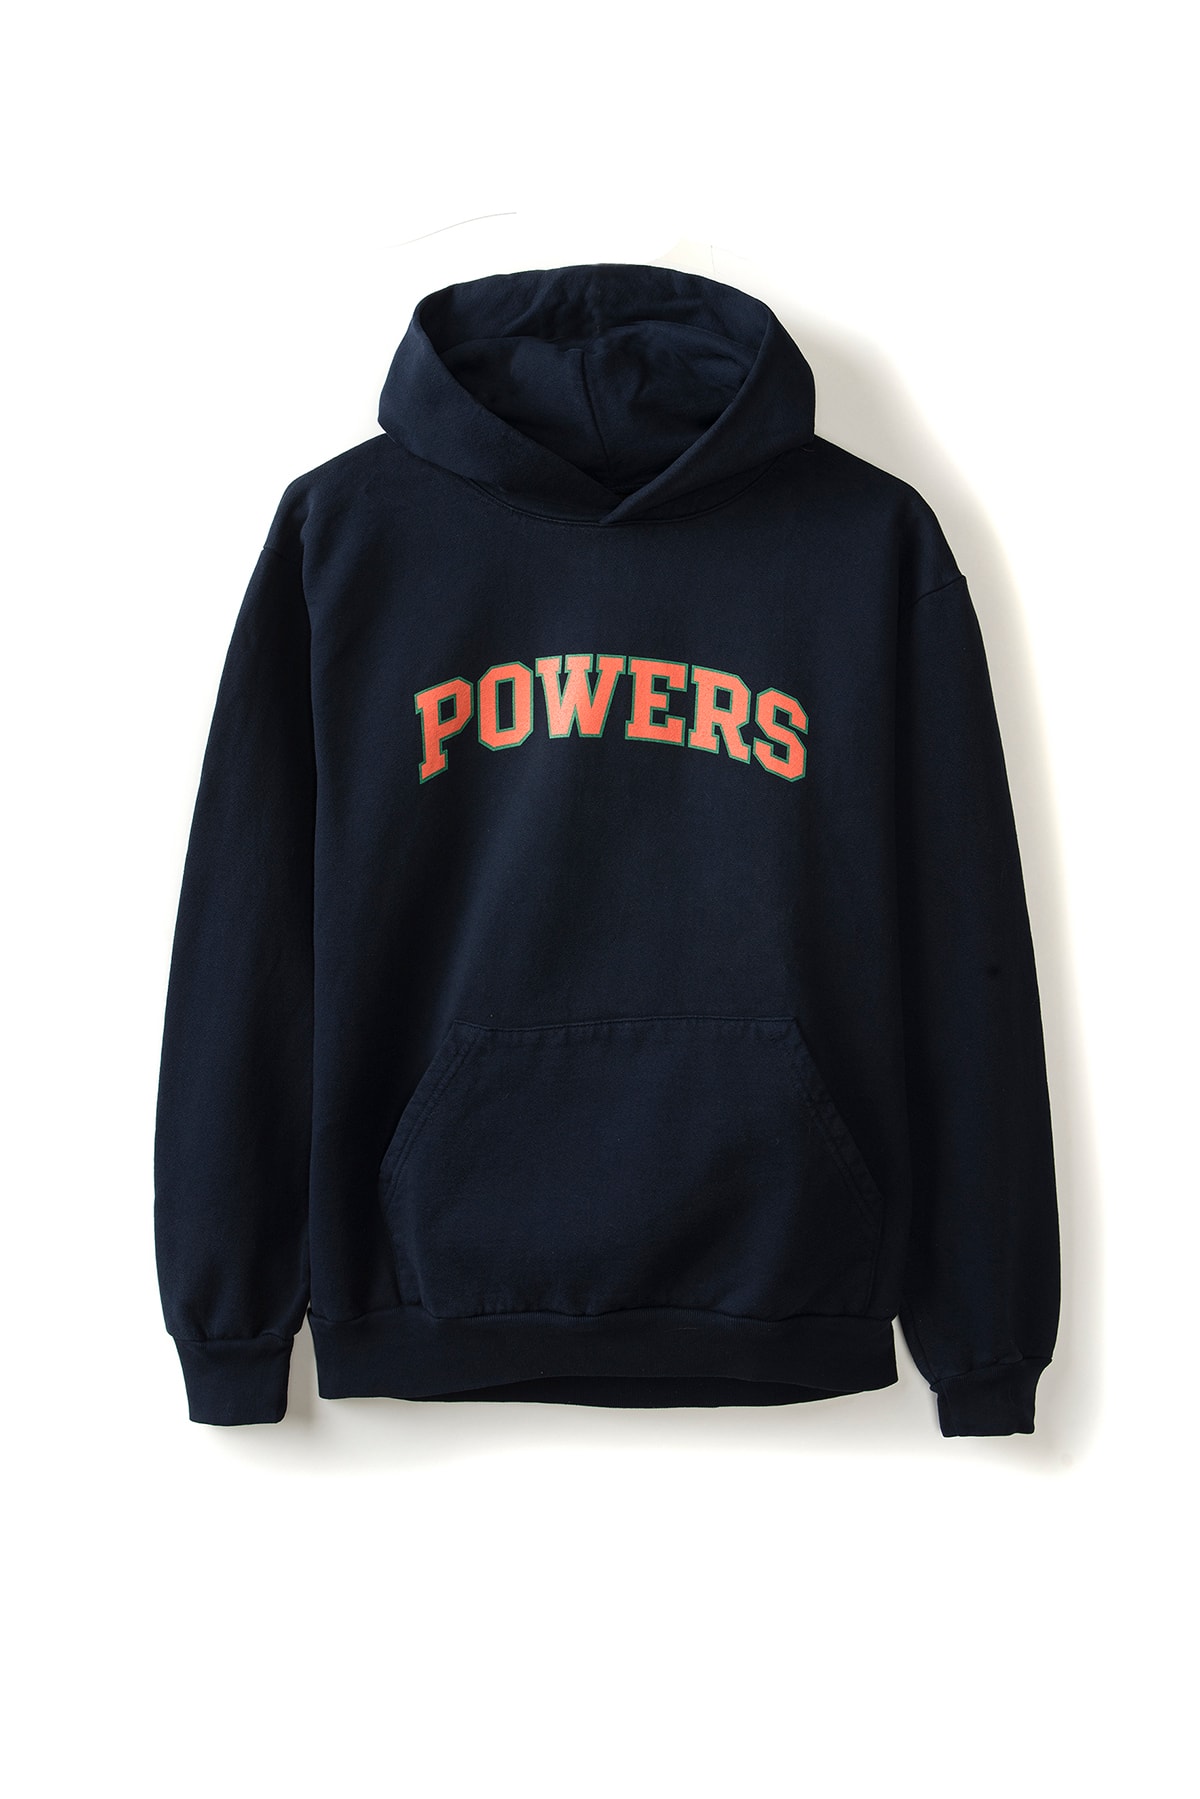 Powers Supply 4th Drop: Tees, Hoodies, Accessories Pirelli Pi Japanese Character